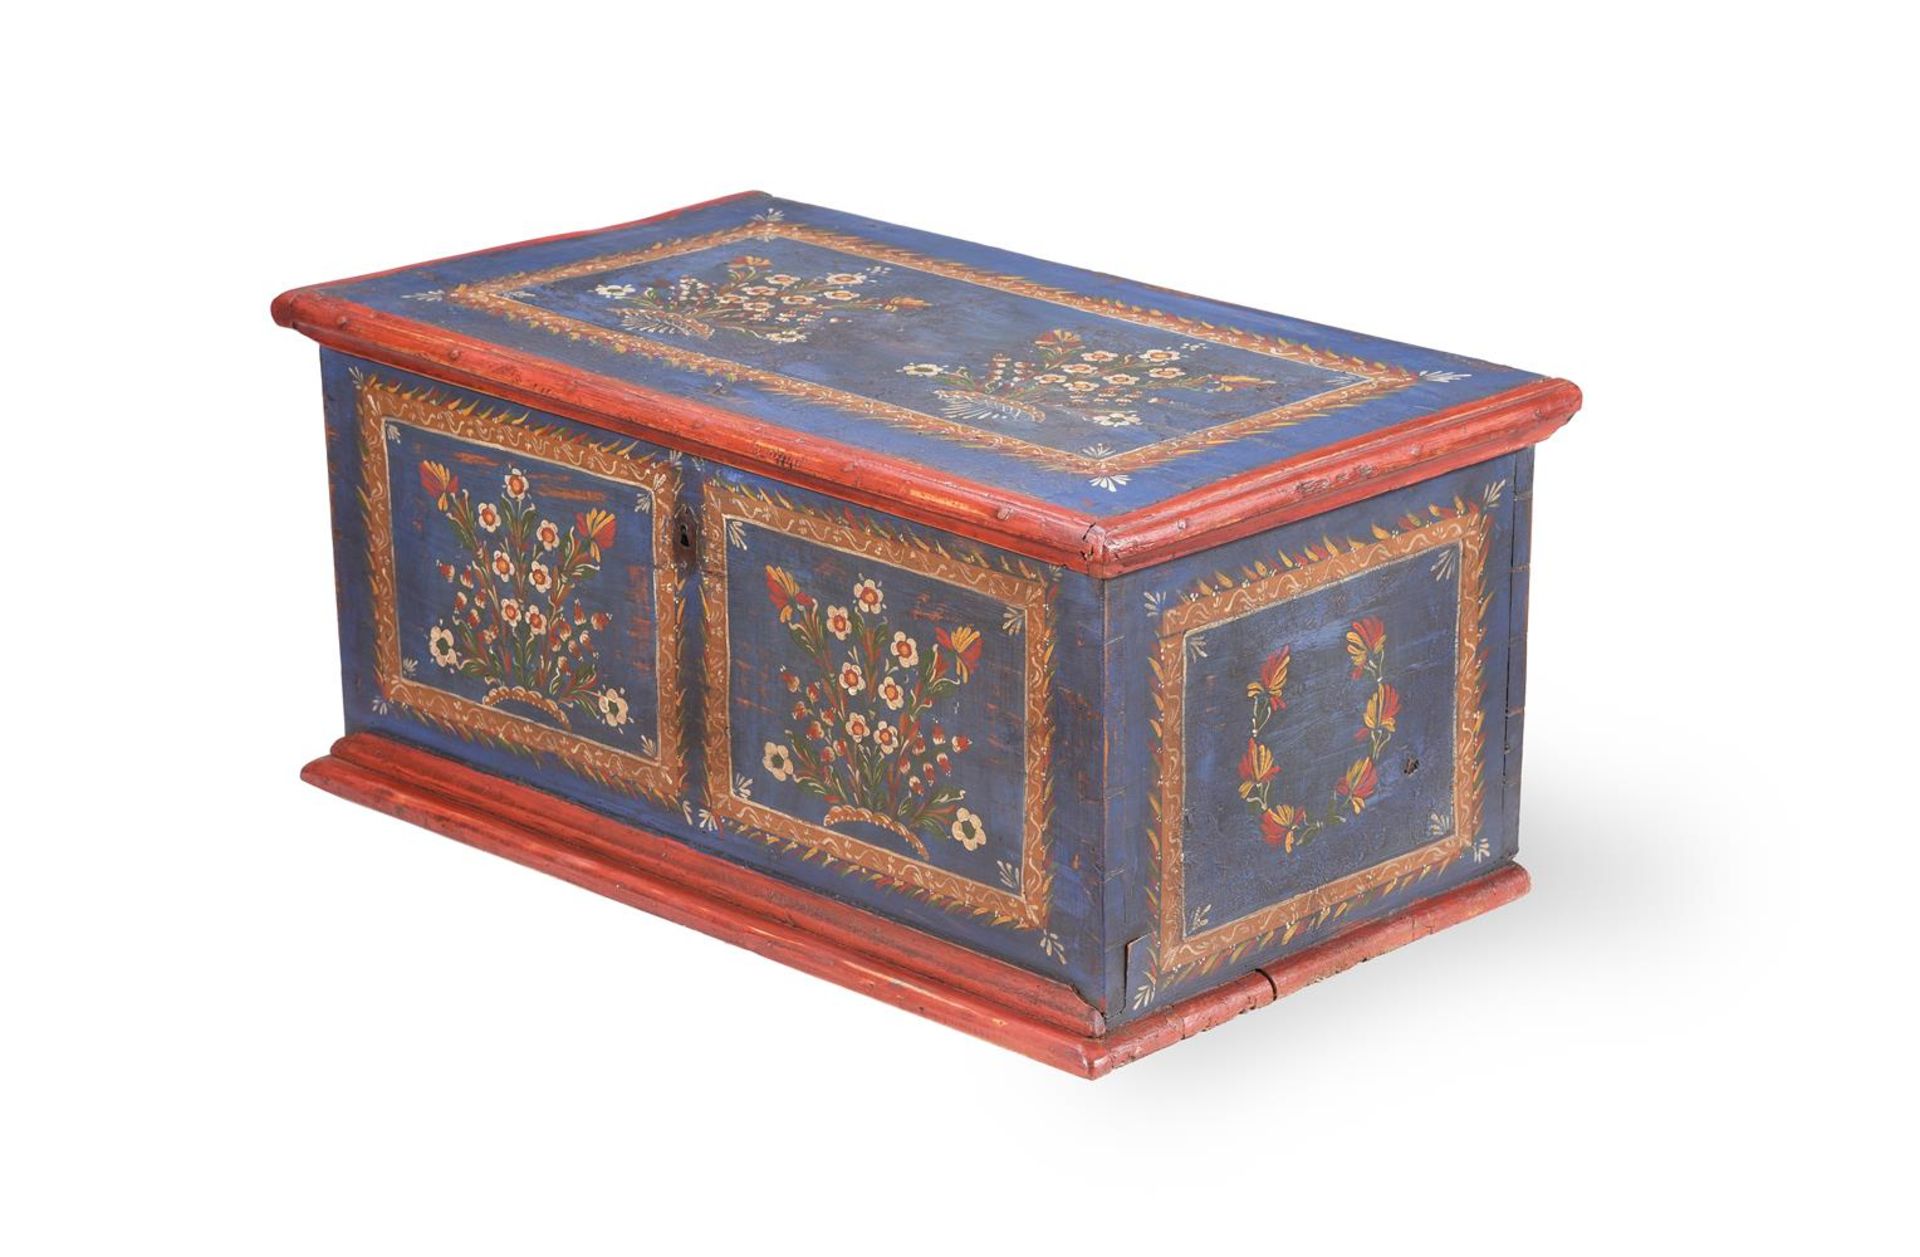 A POLYCHROME PAINTED PINE CHEST, PROBABLY SCANDINAVIAN, 19TH CENTURY